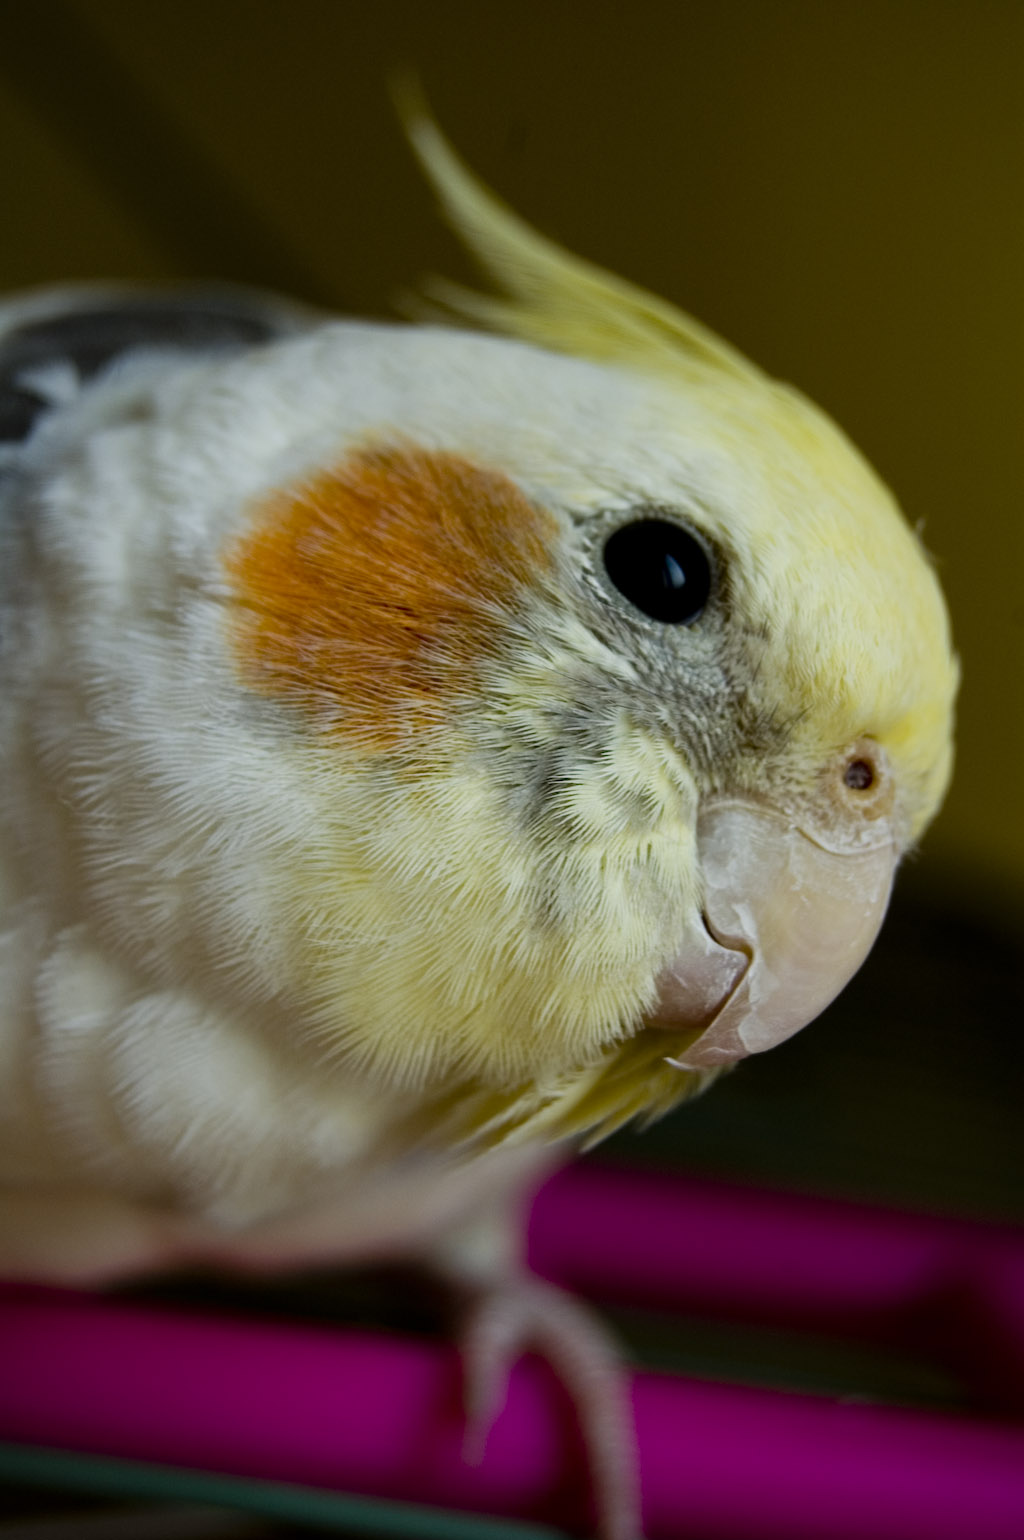 a close - up po of an adult bird looking